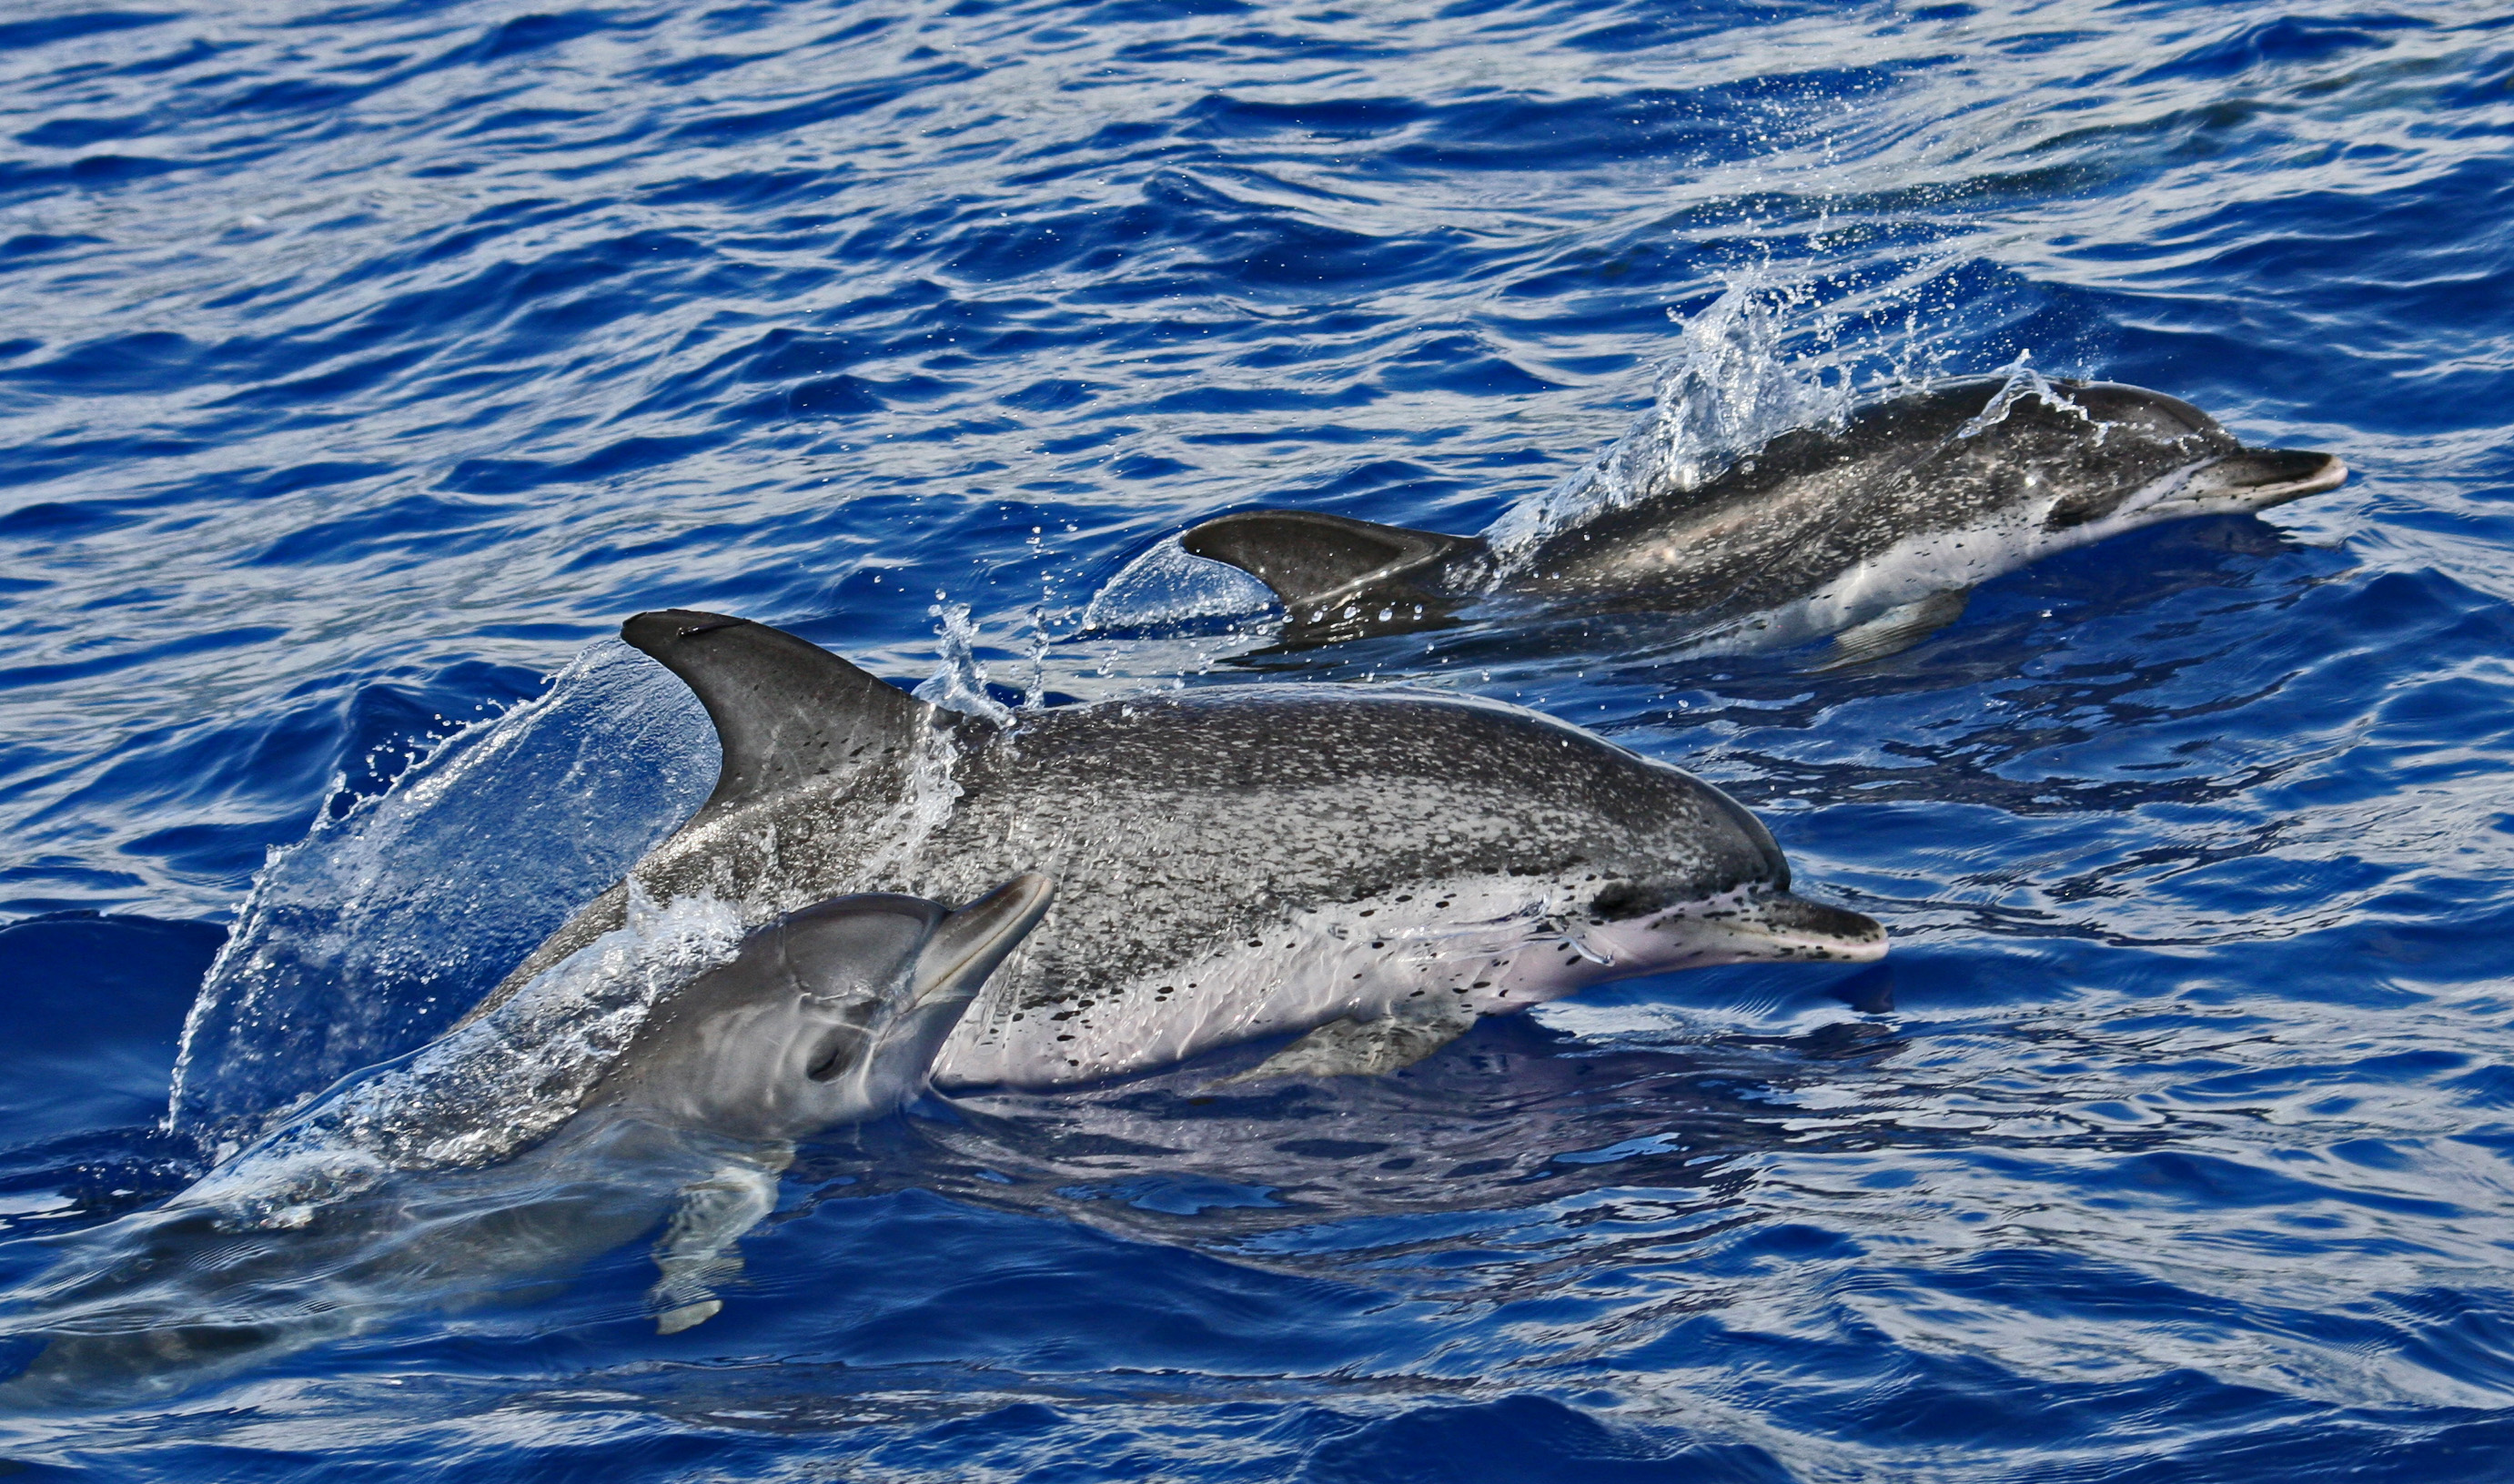 Pantropical spotted dolphins, mother and calf, travel through tropical sea of the Agoa Sanctuary, recently declared by France in the Caribbean and being considered for expansion and higher protection levels. Credit: © 2011 Cherylle Millard-Dawe, from...